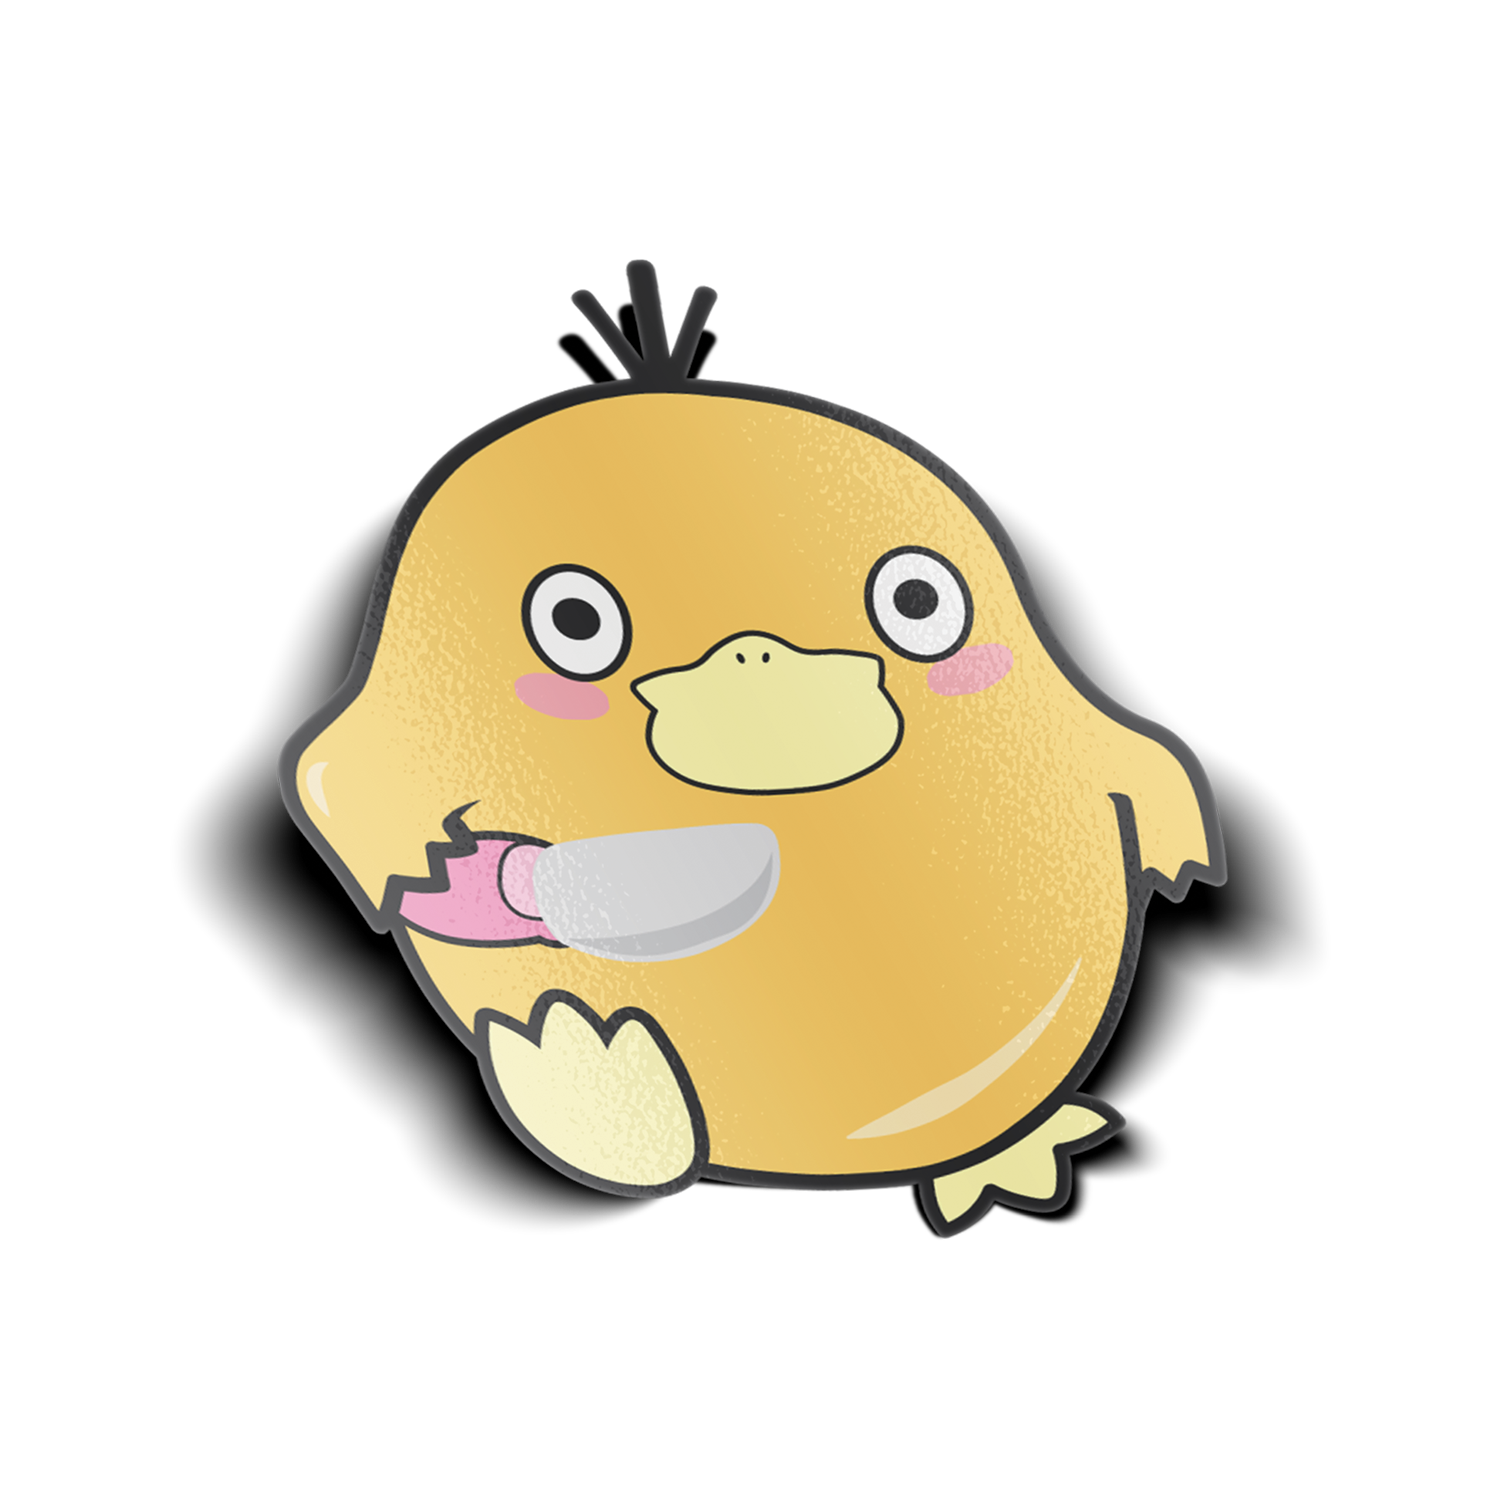 Psyduck with Knife Air Sticker design includes Pokemon Psyduck holding a knife.